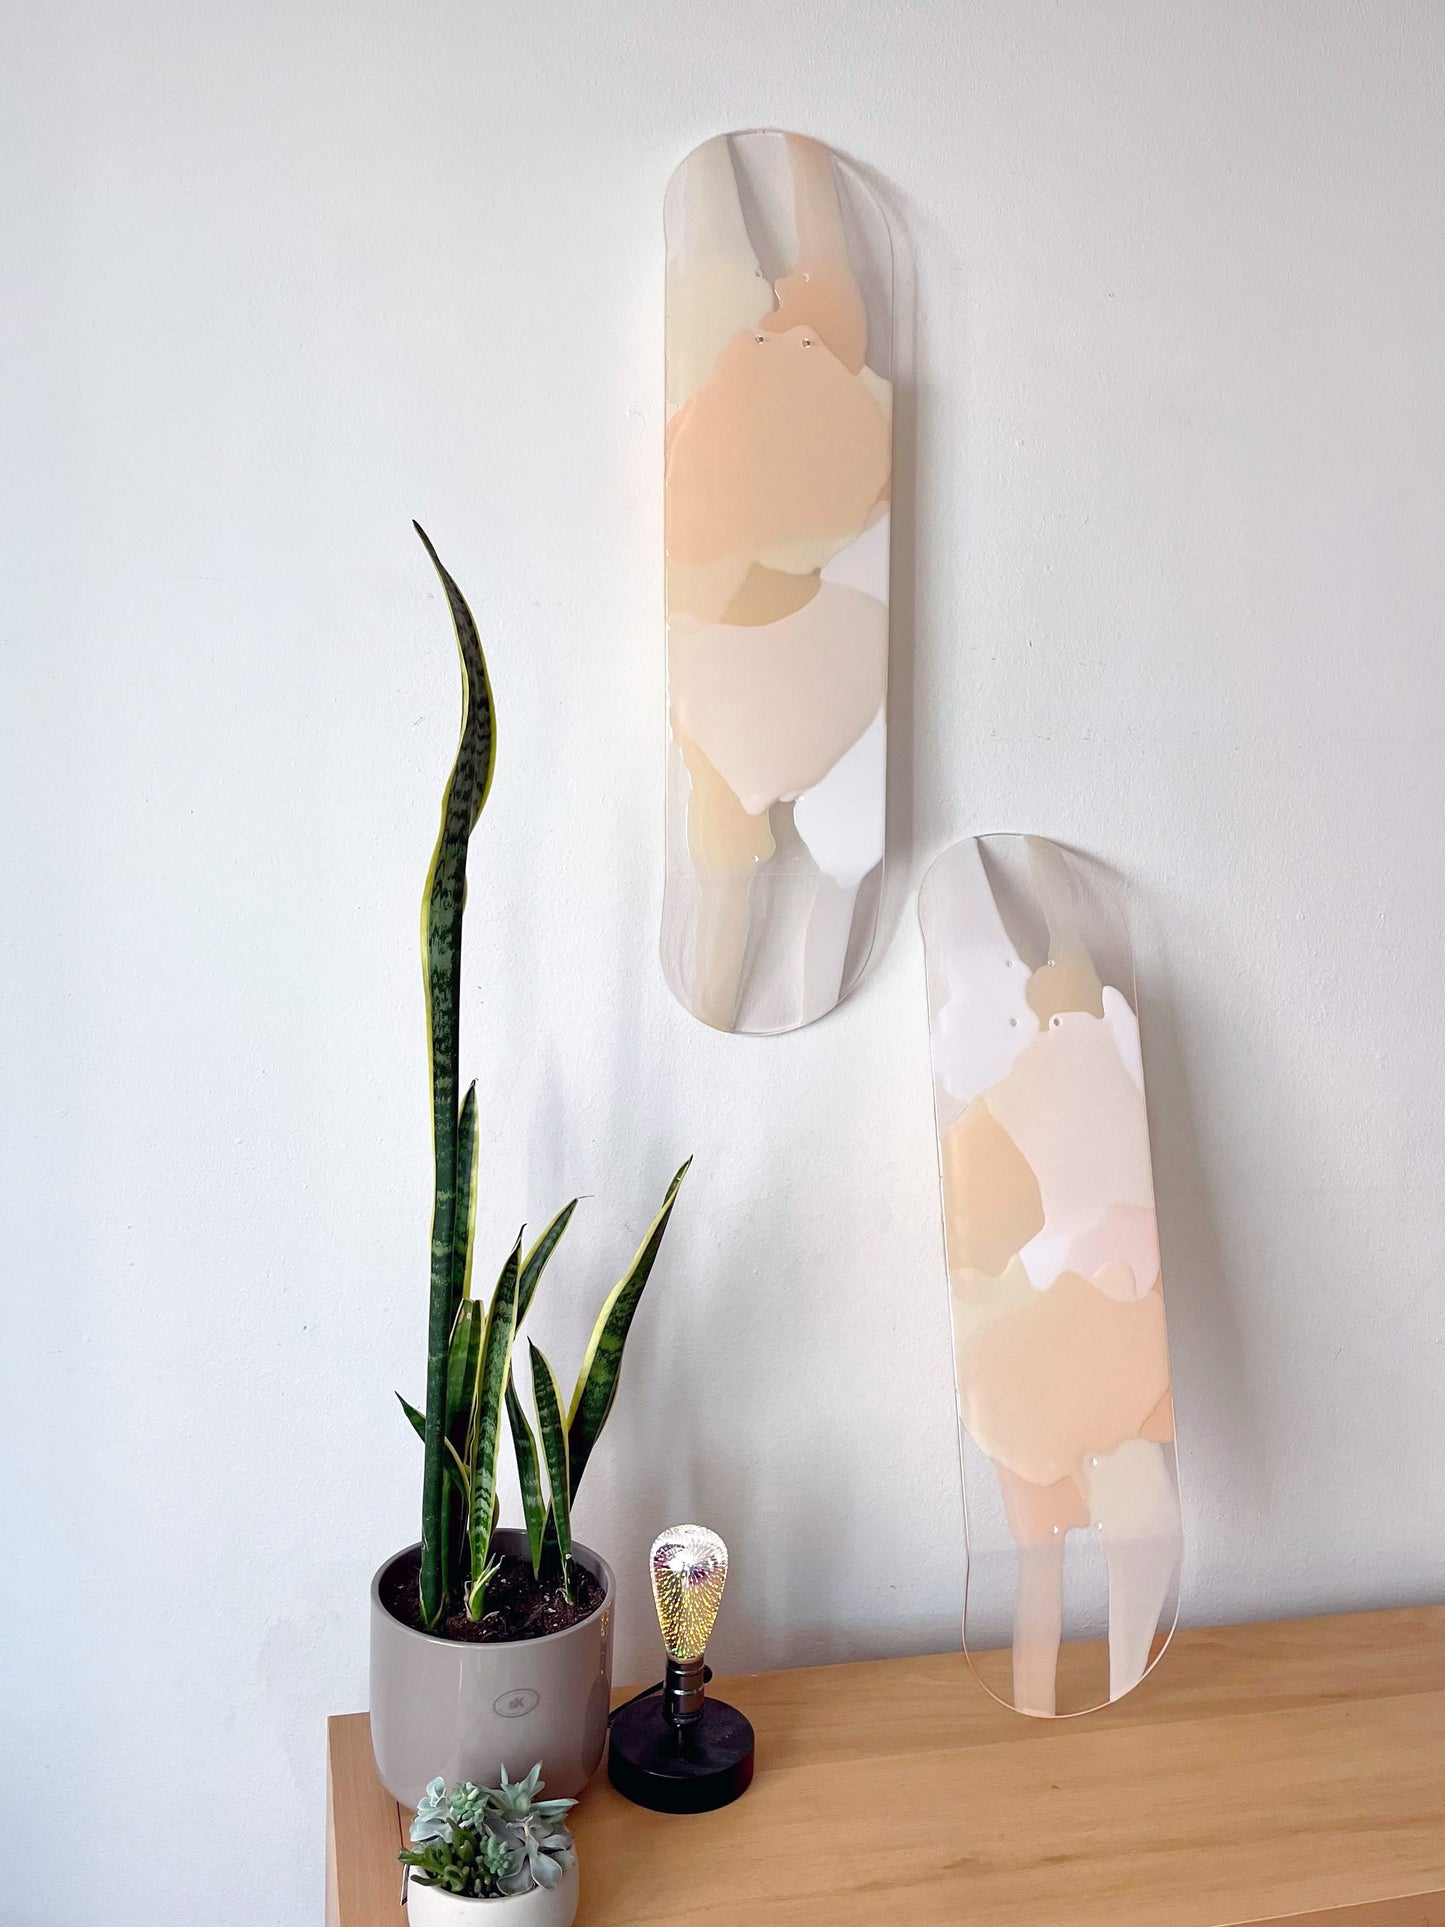 Two see-through, bohemian, neutral colored skateboard decks made of white, taupe, beige and cream resin layers. One artwork is hanging and one piece of art is leaning against wall.